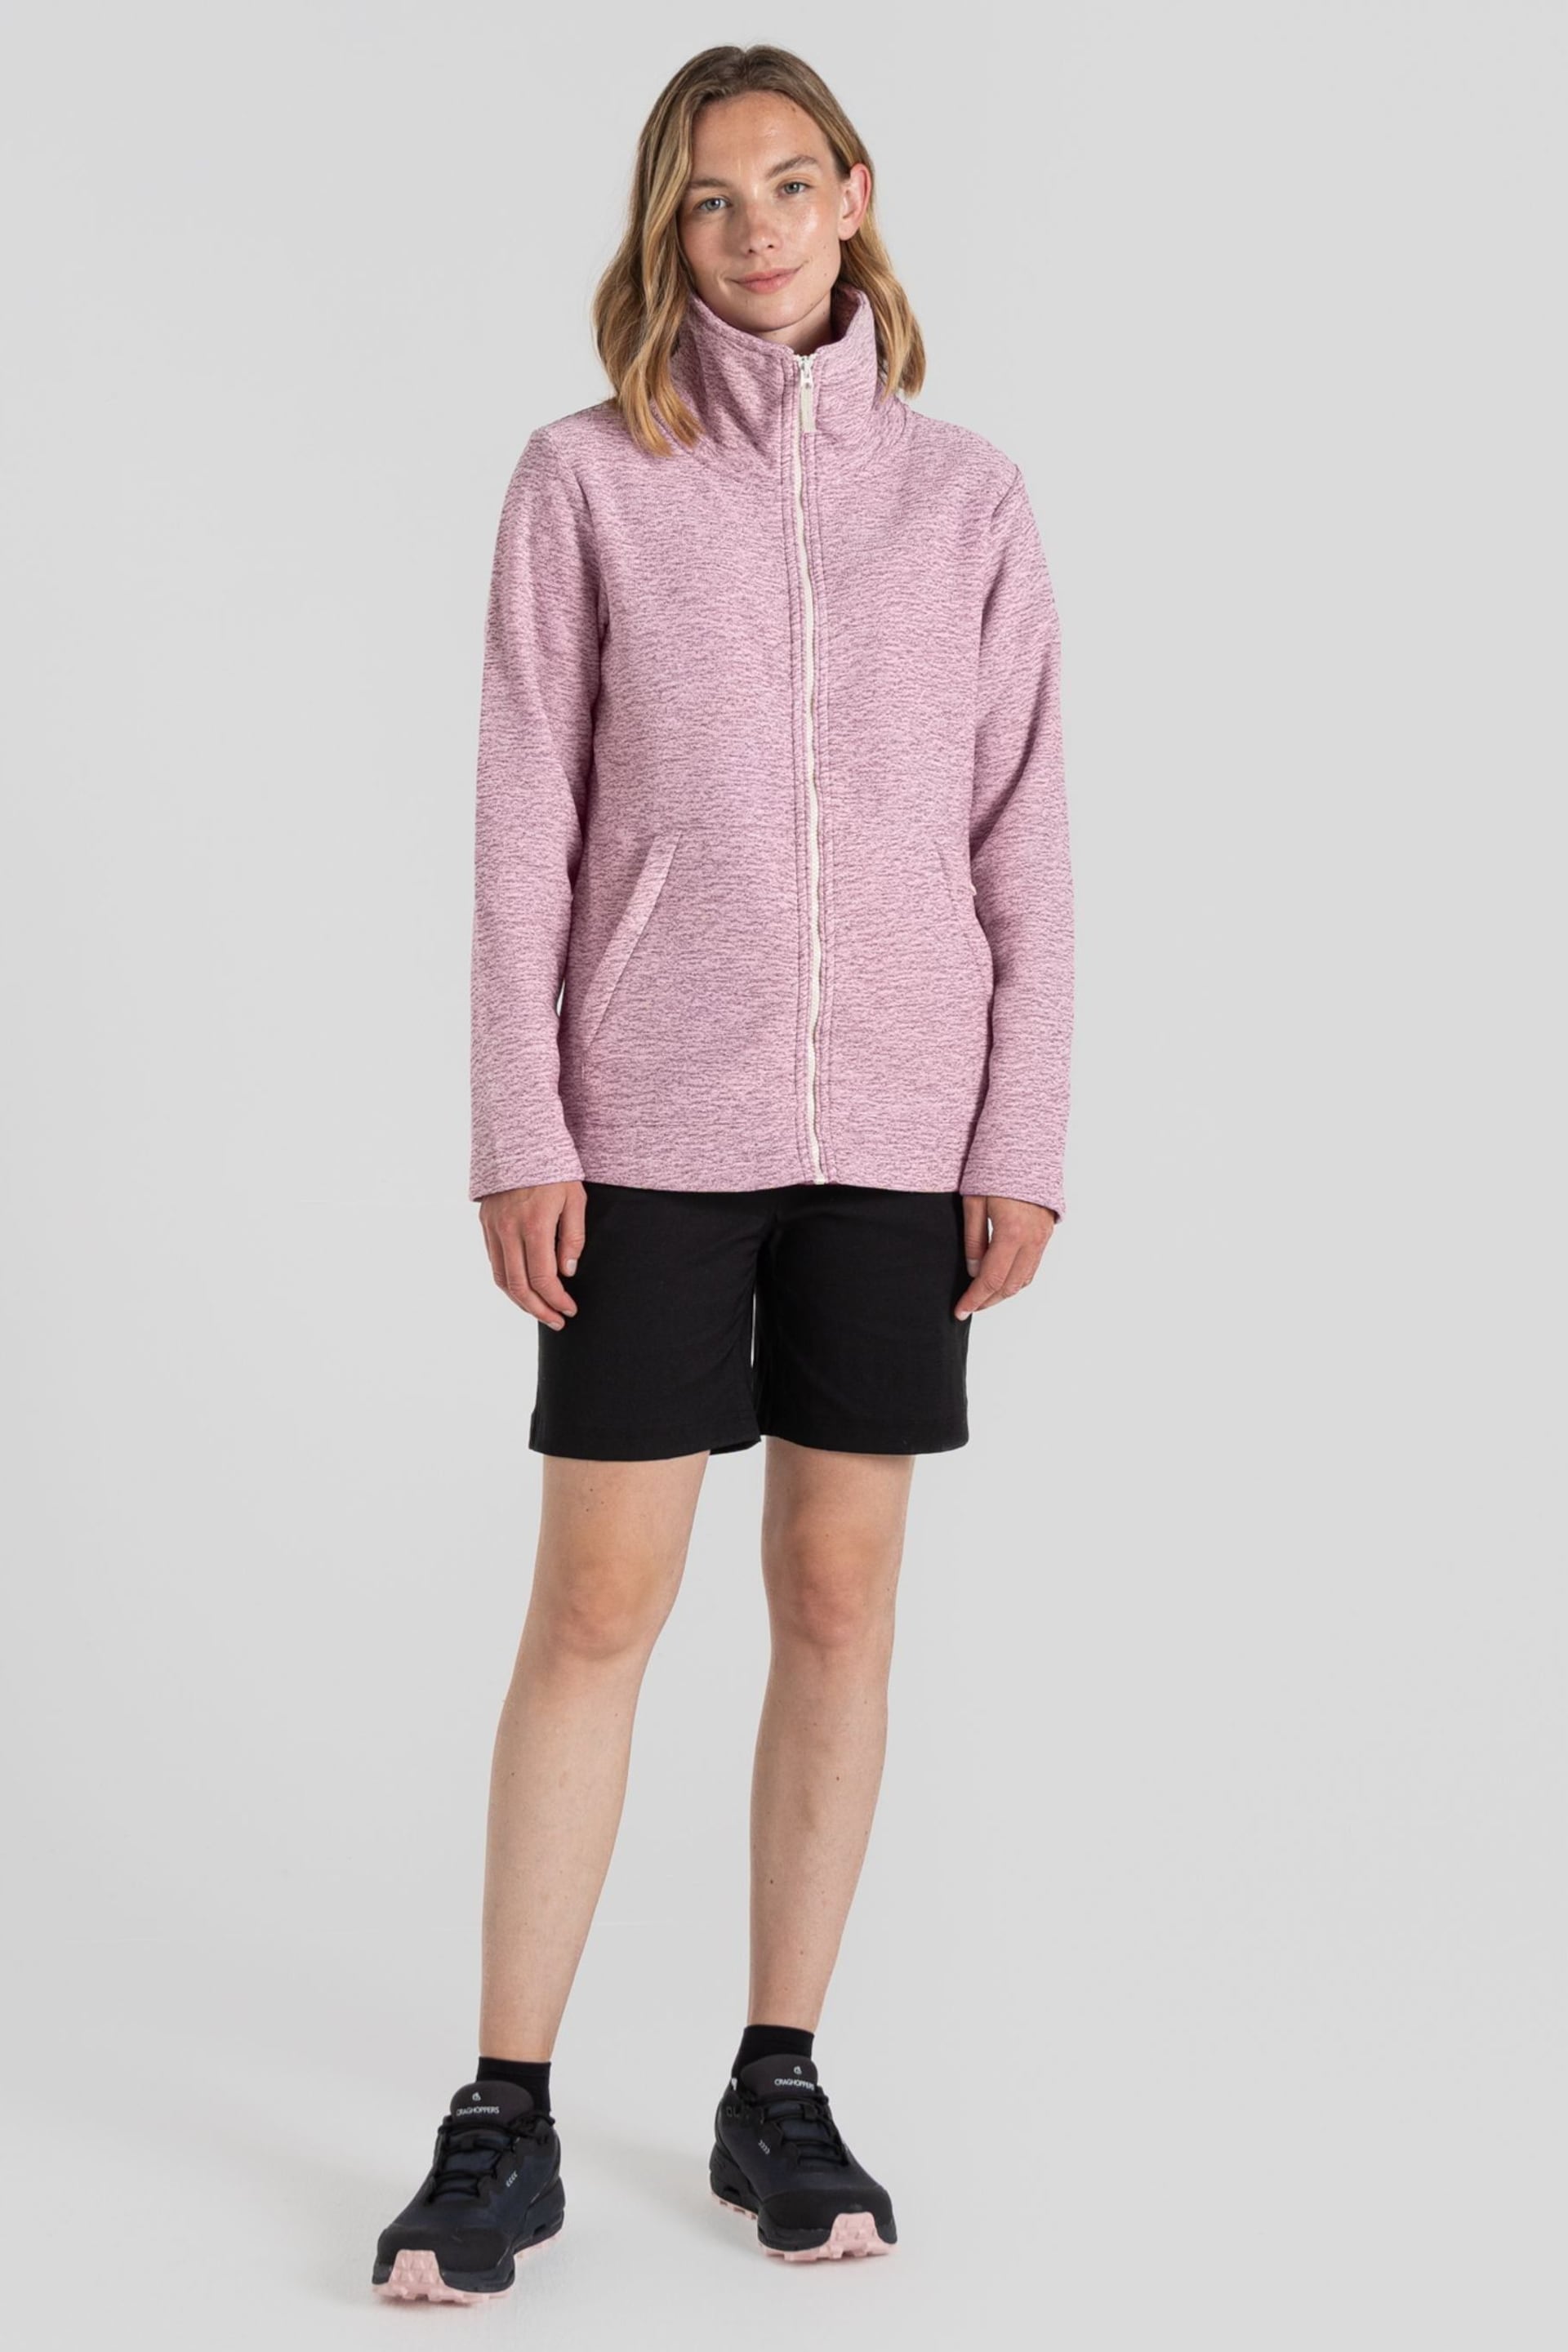 Craghoppers Pink Aio Jacket - Image 4 of 5